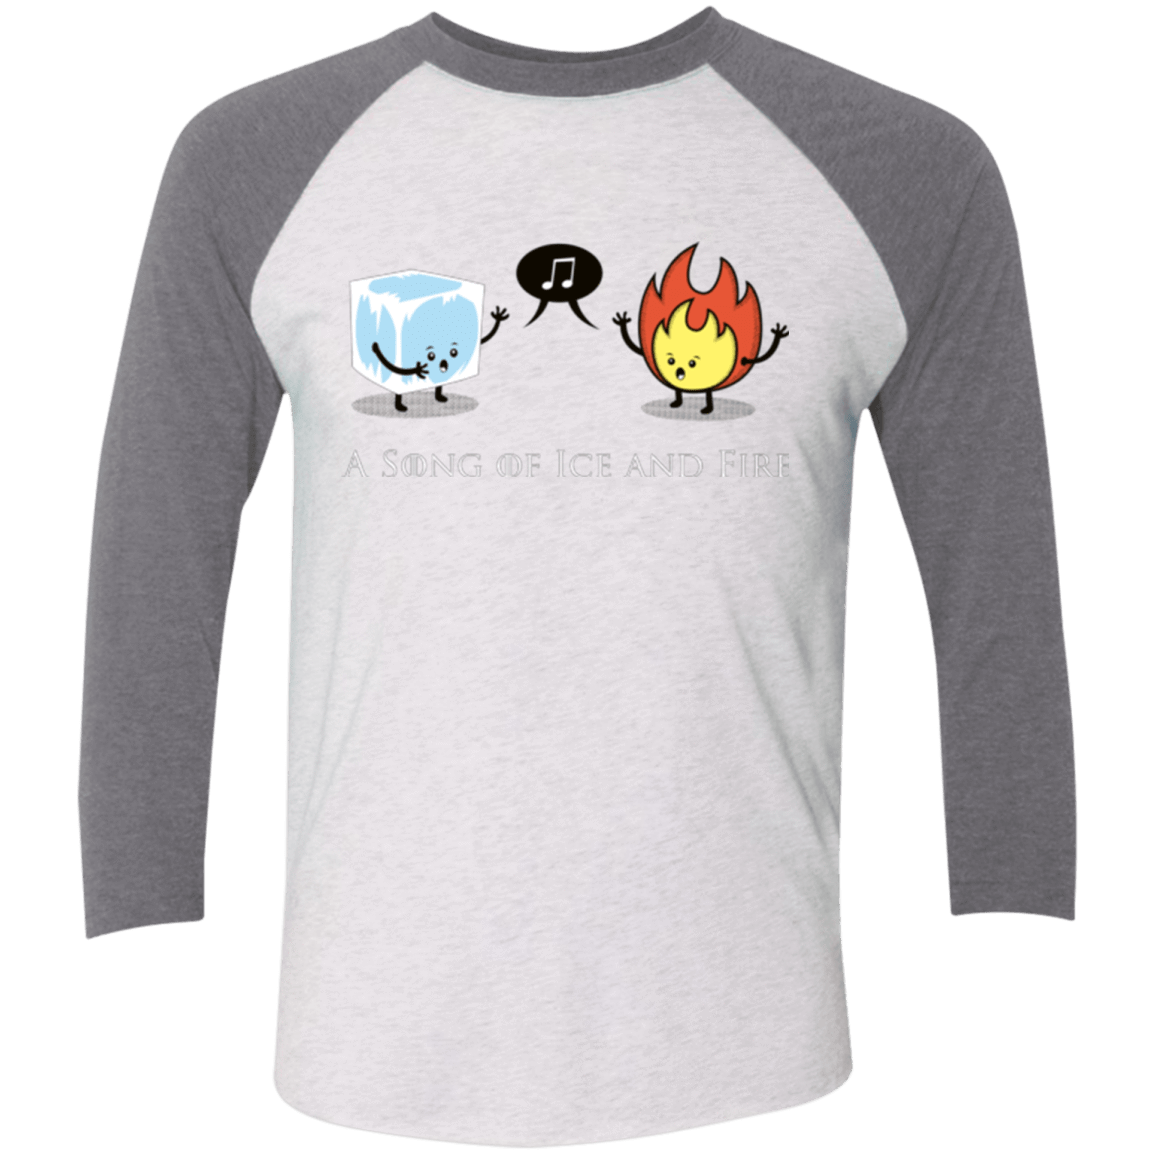 T-Shirts Heather White/Premium Heather / X-Small A Song of Ice and Fire Men's Triblend 3/4 Sleeve